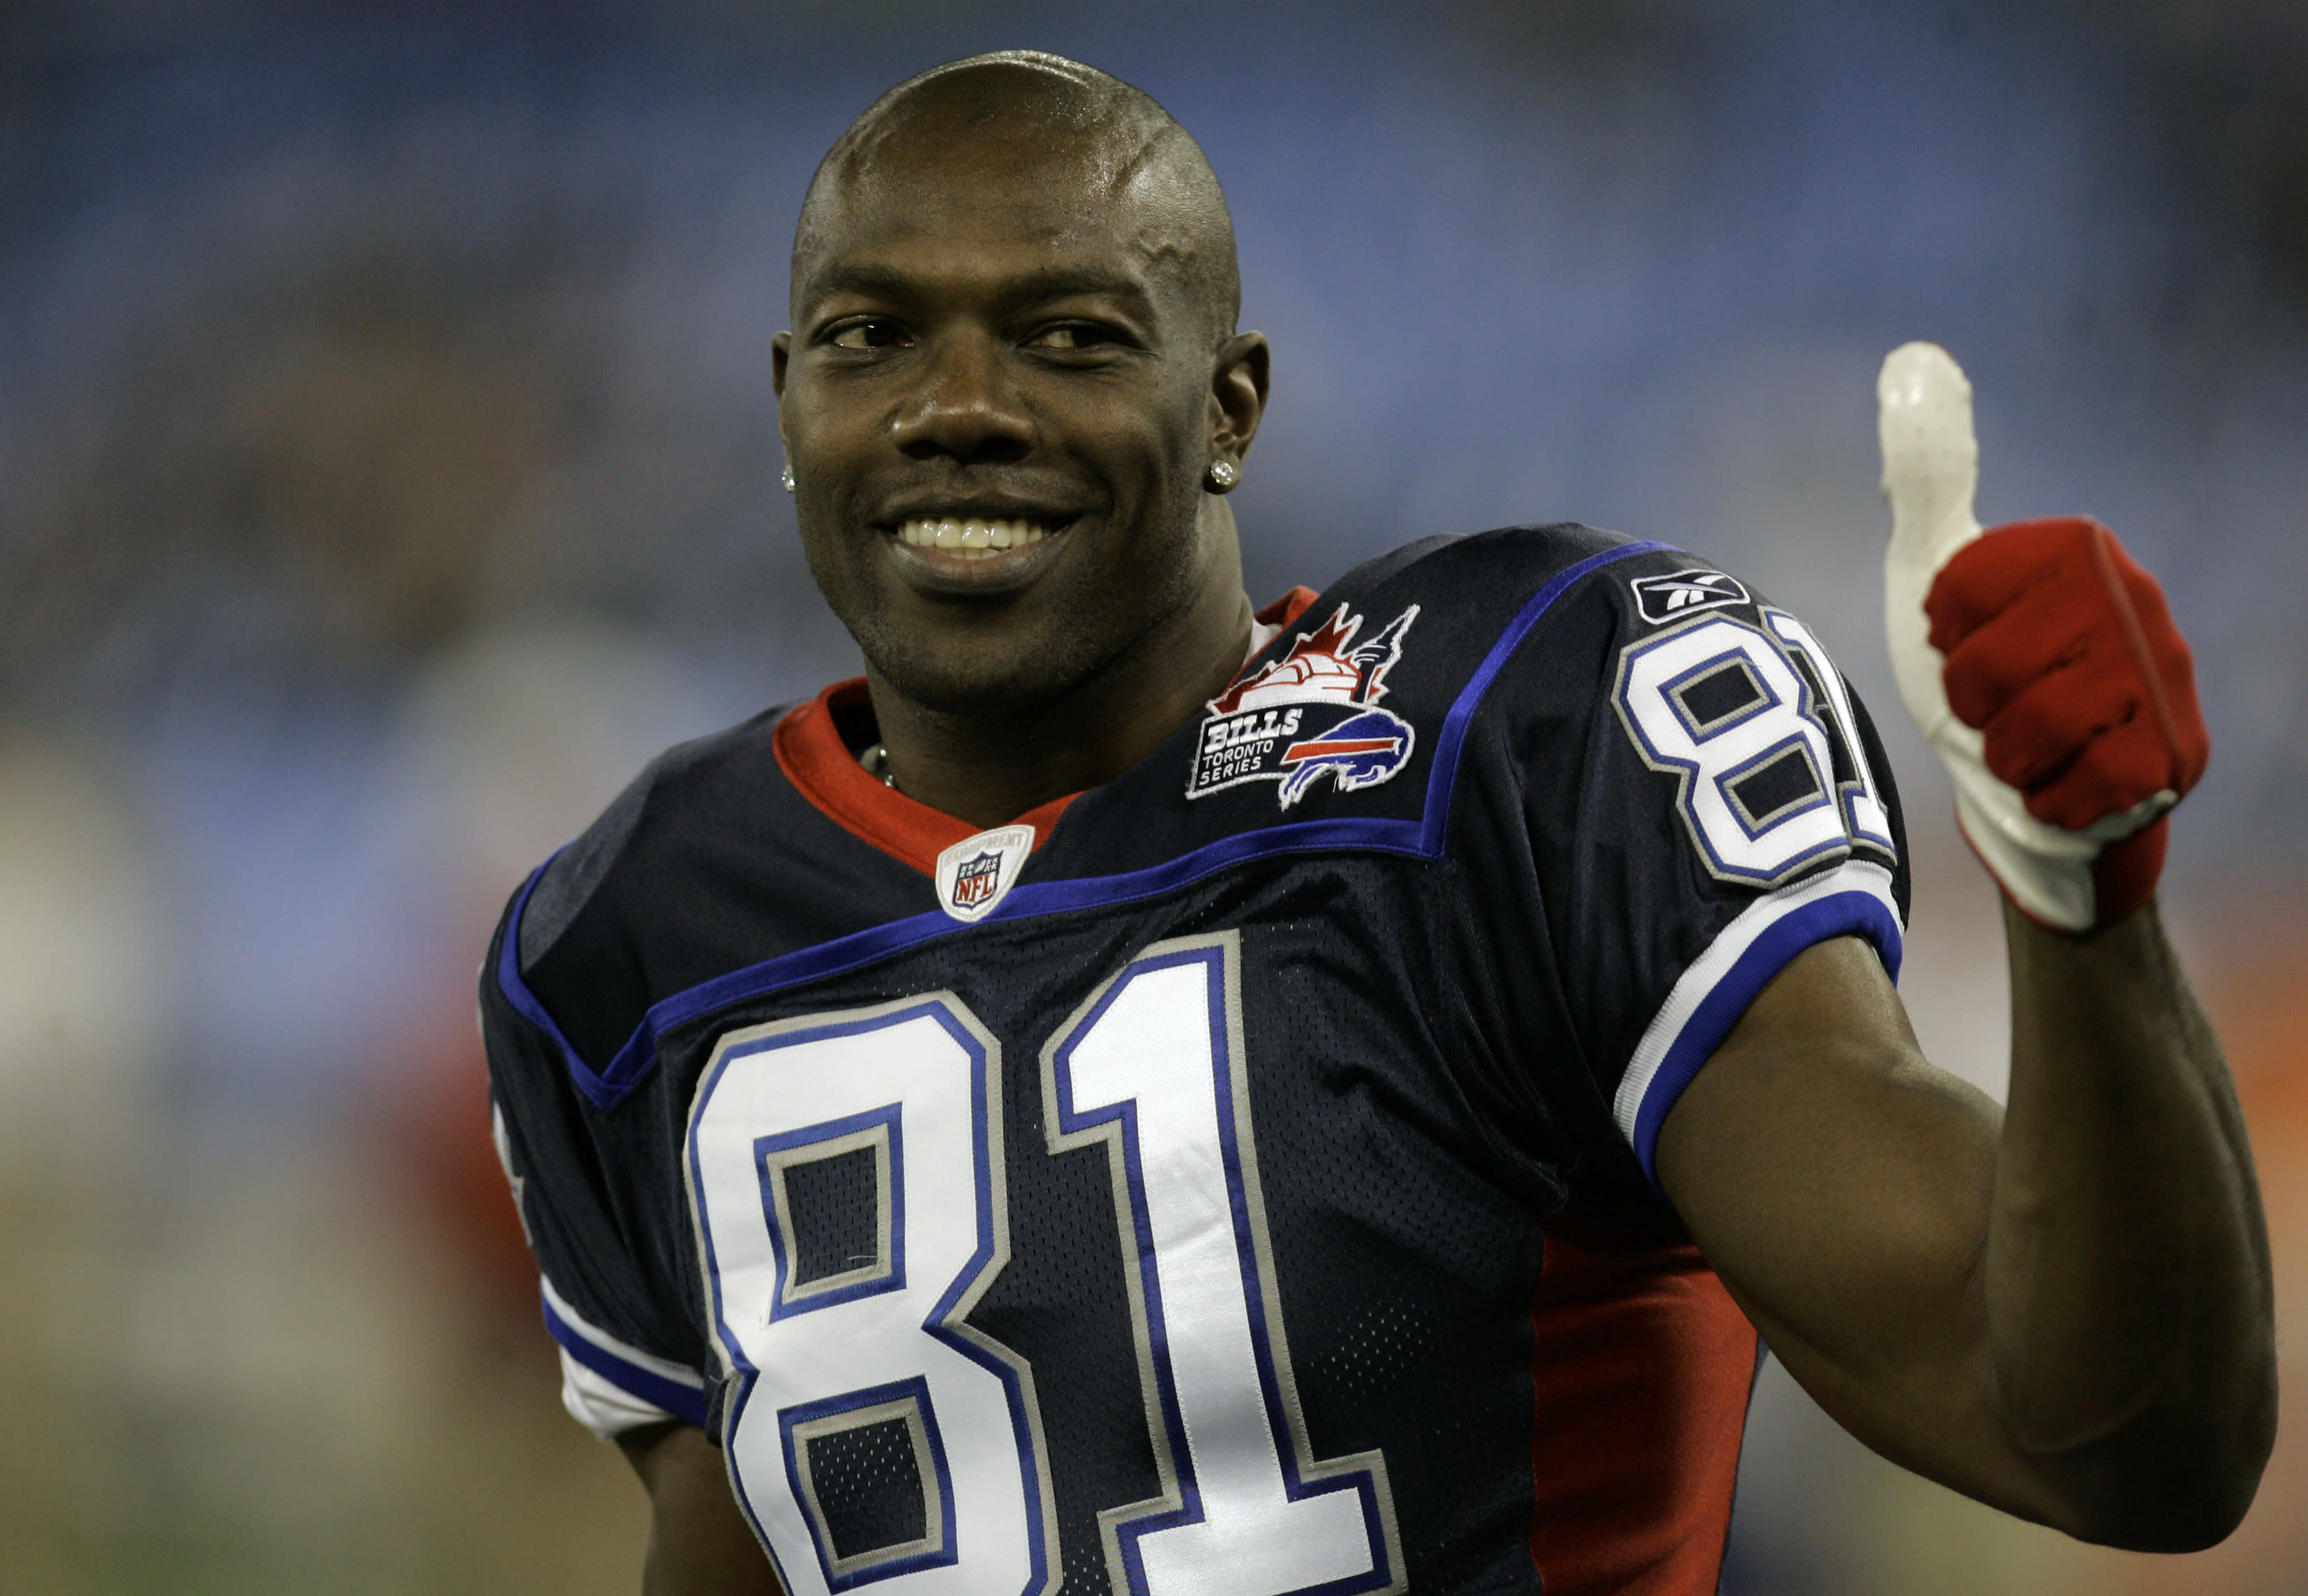 Terrell Owens finally gets into the NFL Hall of Fame - Blogging The Boys